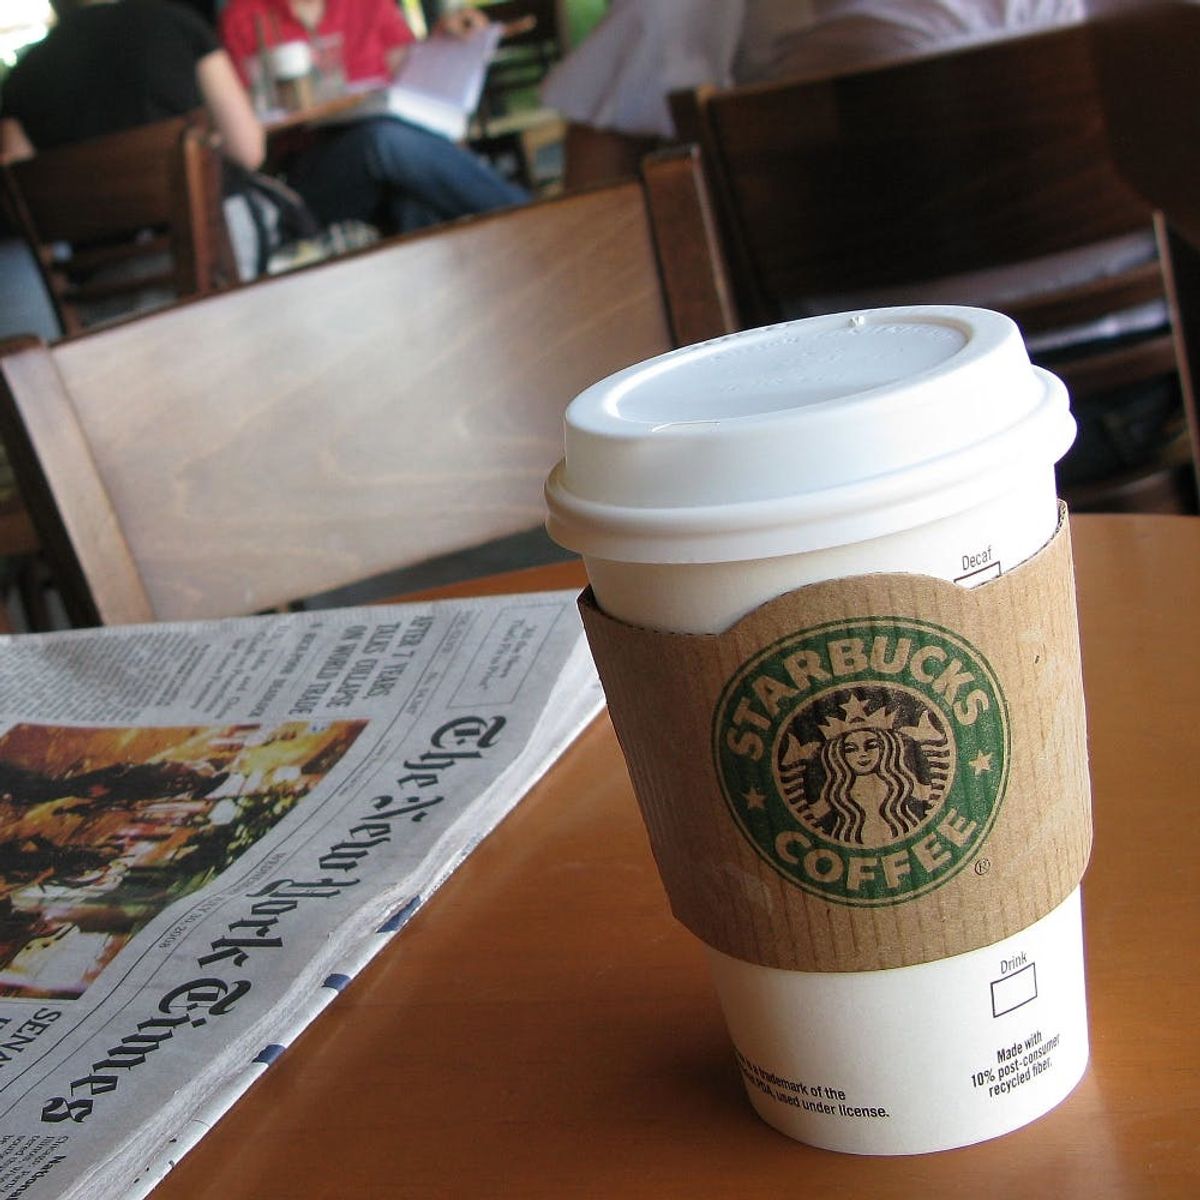 You Can Now Score Free Starbucks Coffee Just by Talking About Politics